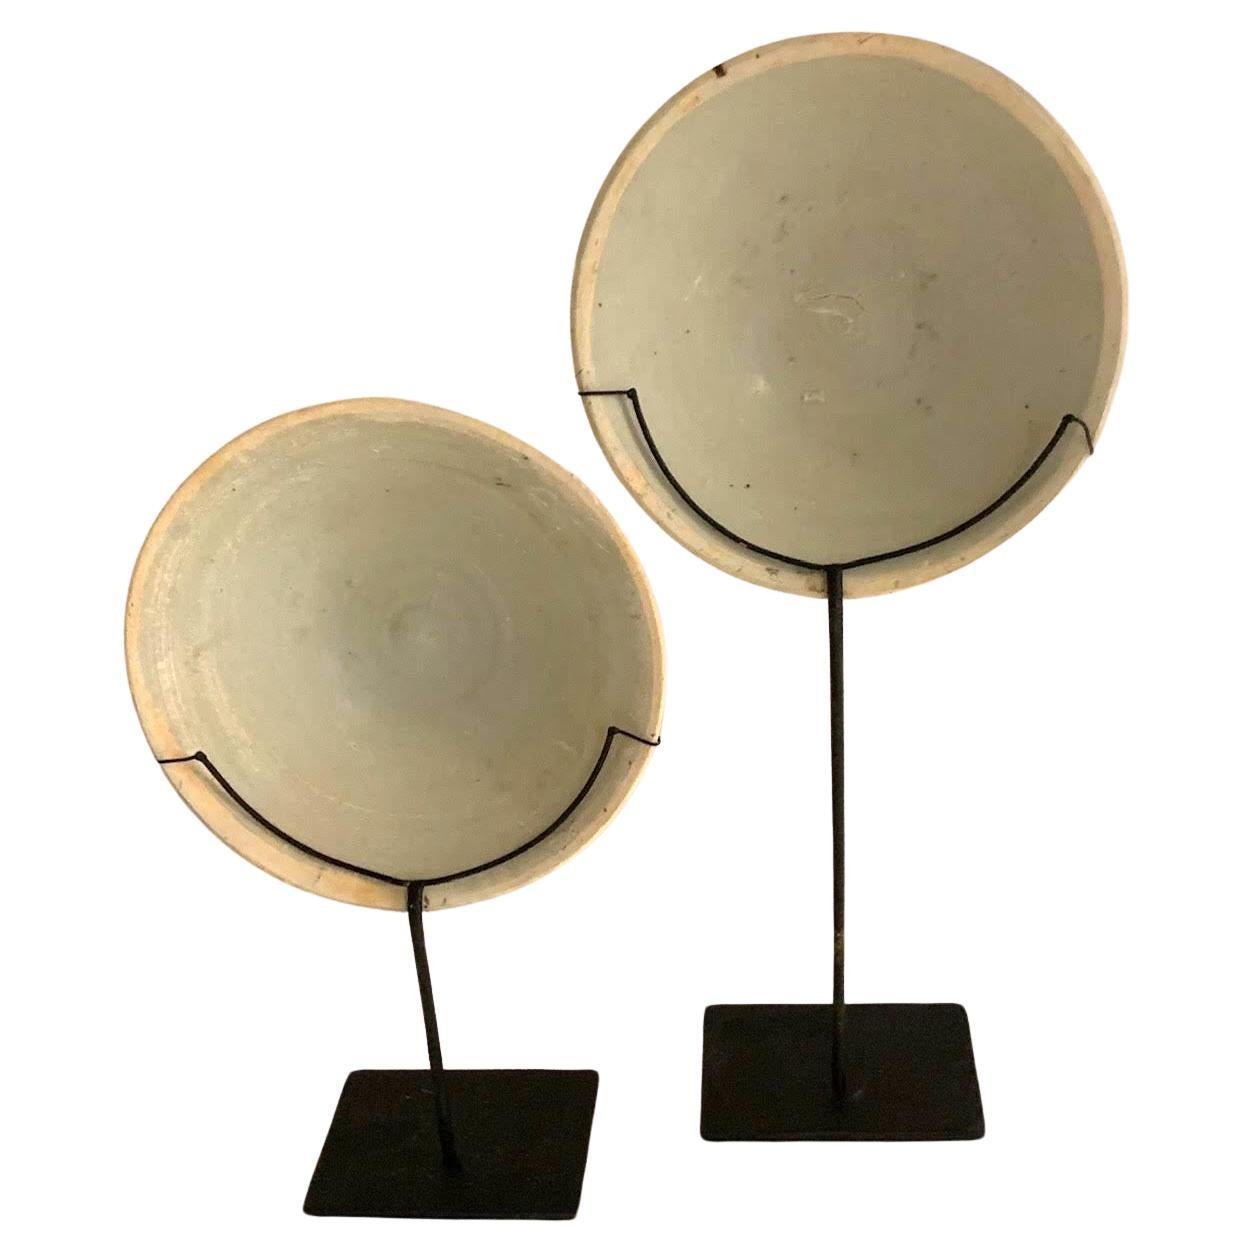 19th Century Set Of Two Cream Bowls On Stands, China